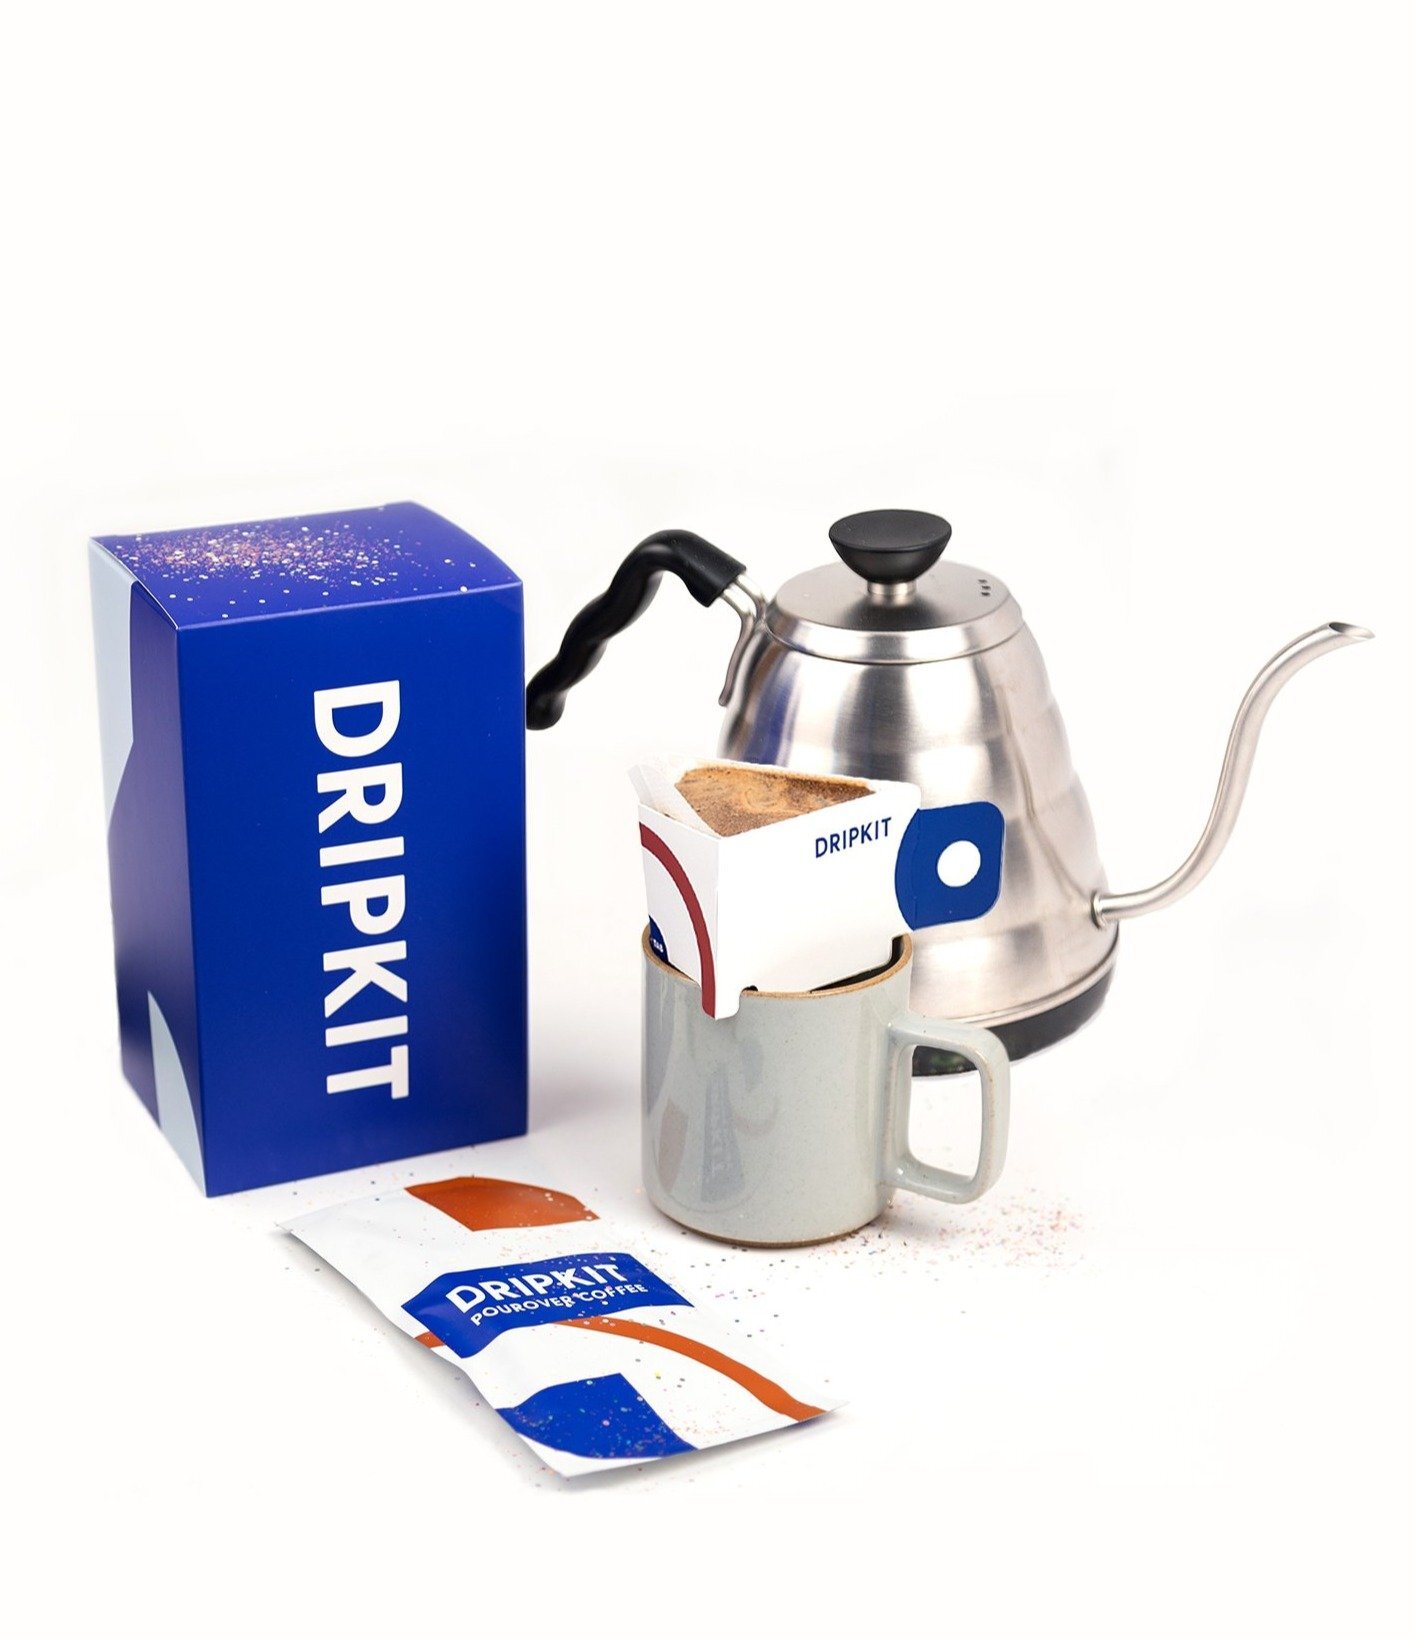 Be Your Own Barista with Dripkit